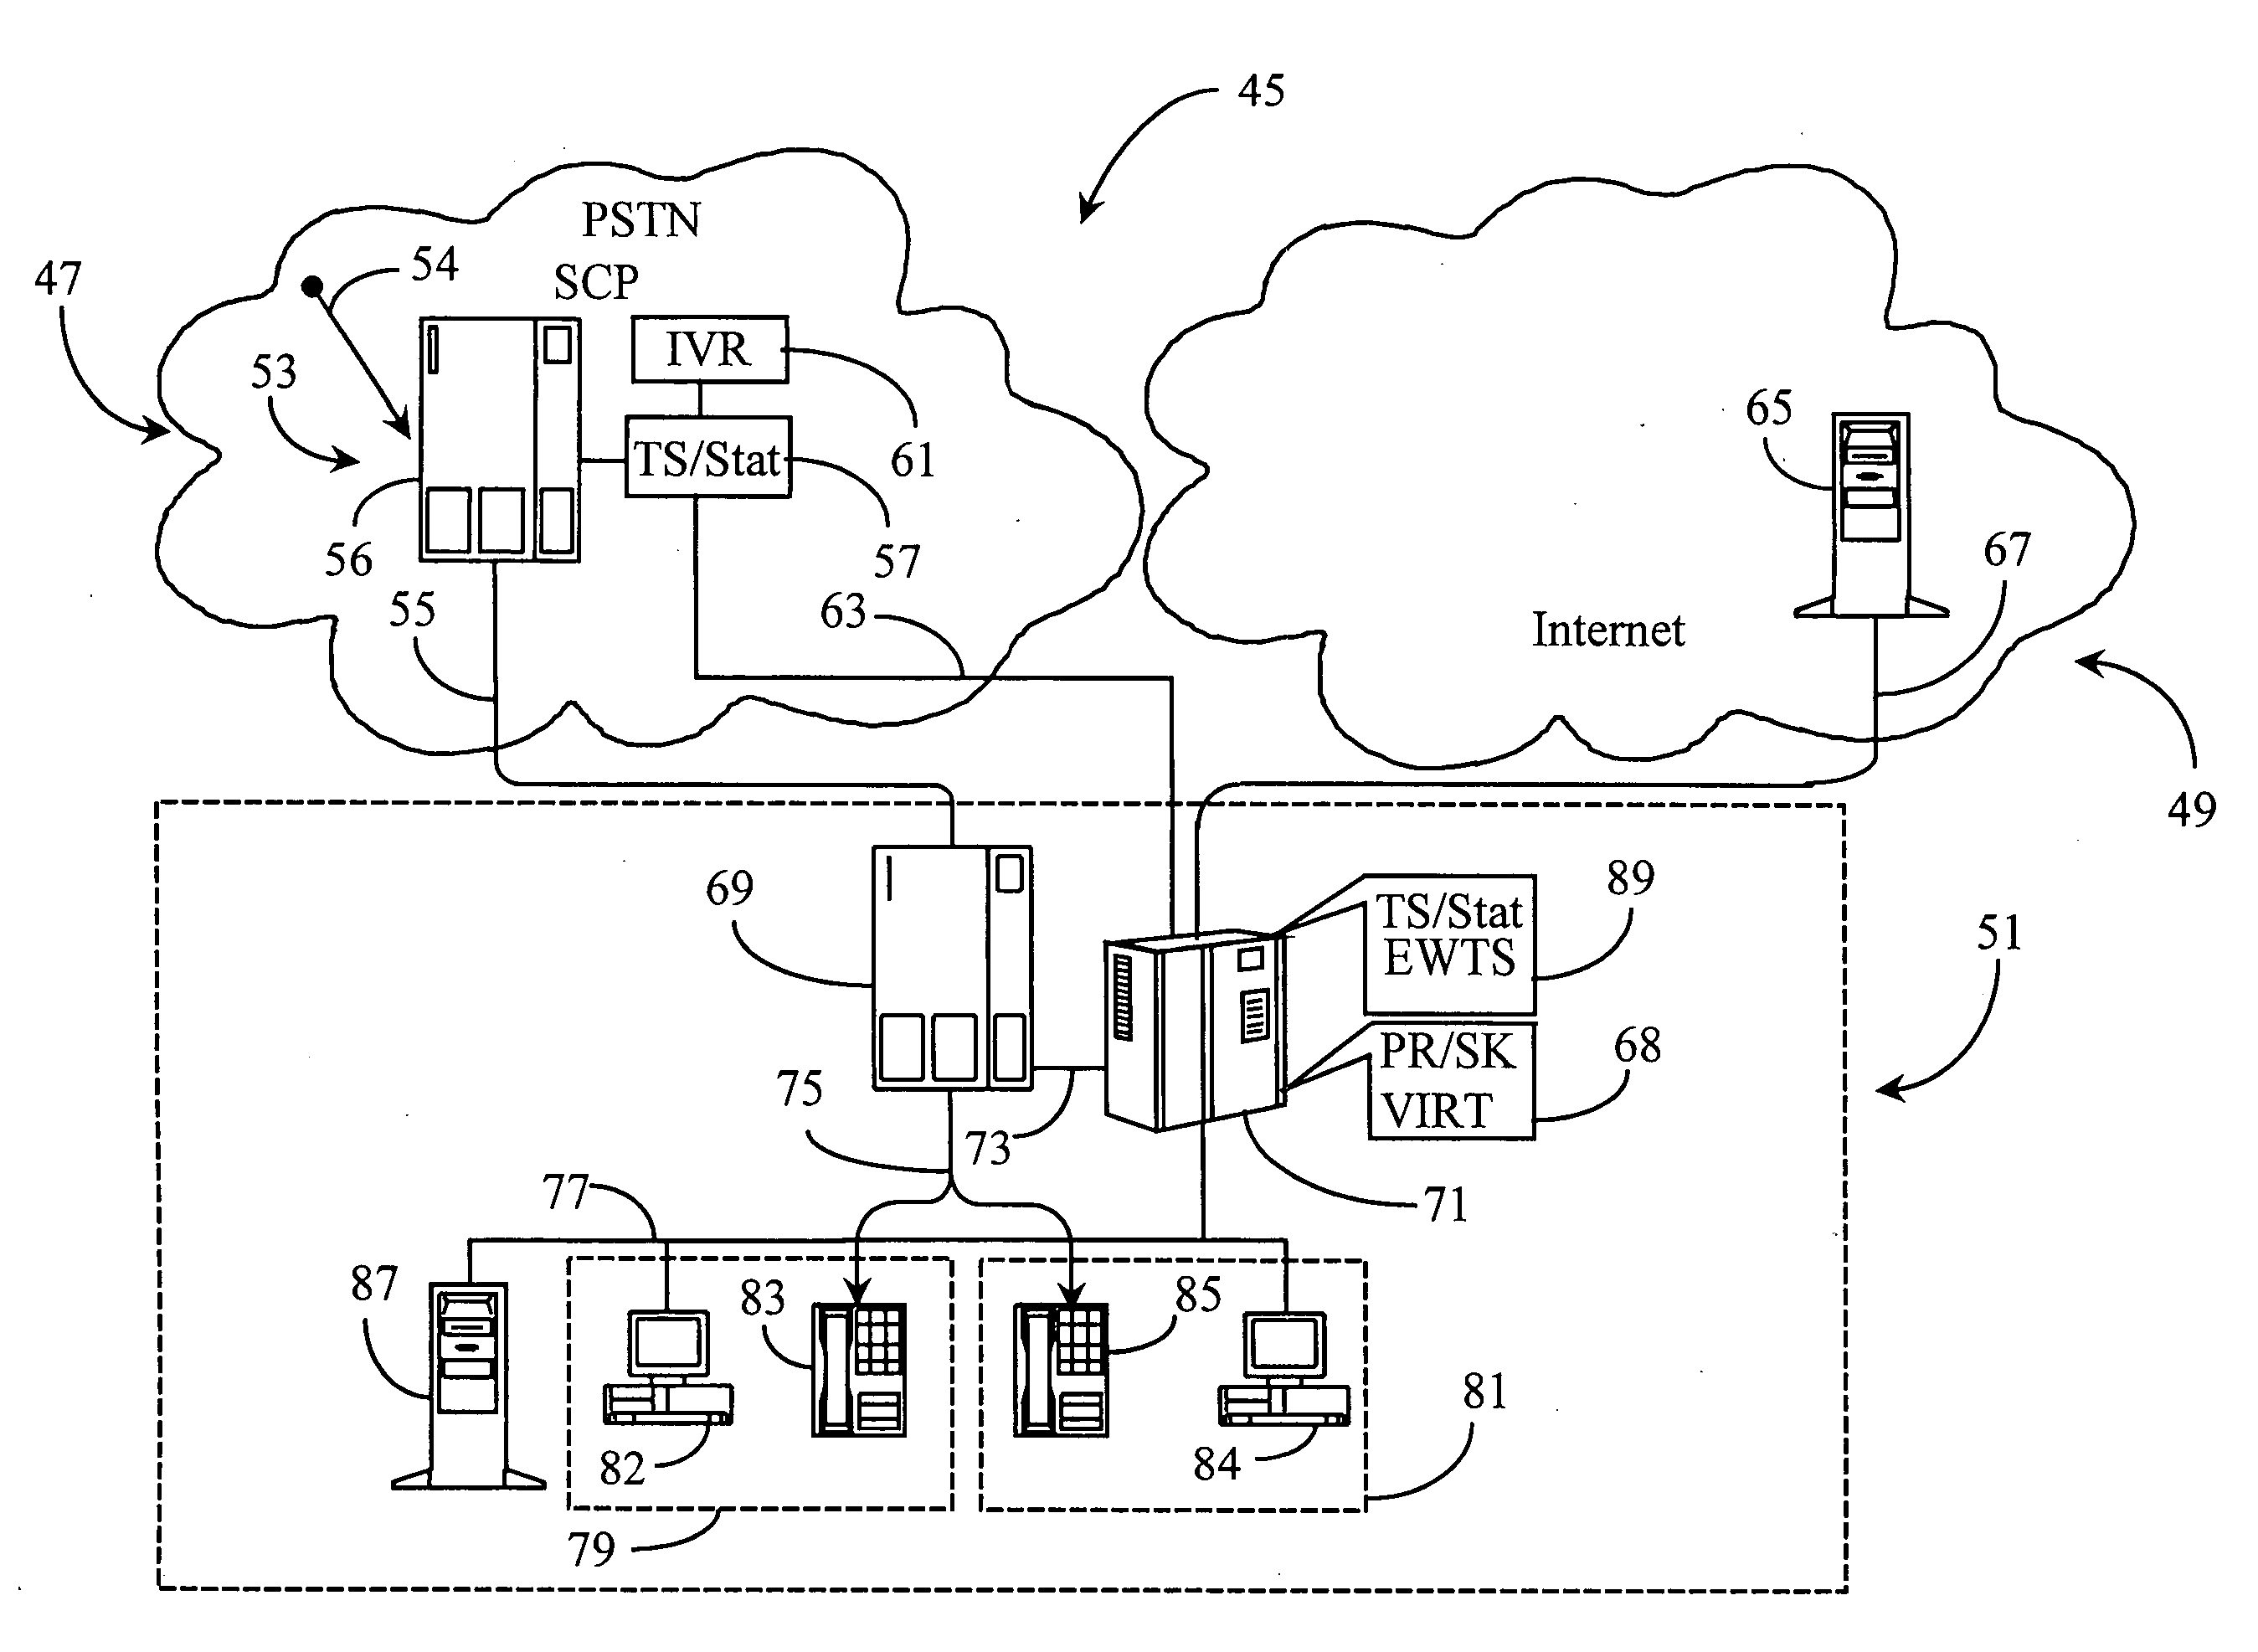 Method for estimating telephony system-queue waiting time in an agent level routing environment